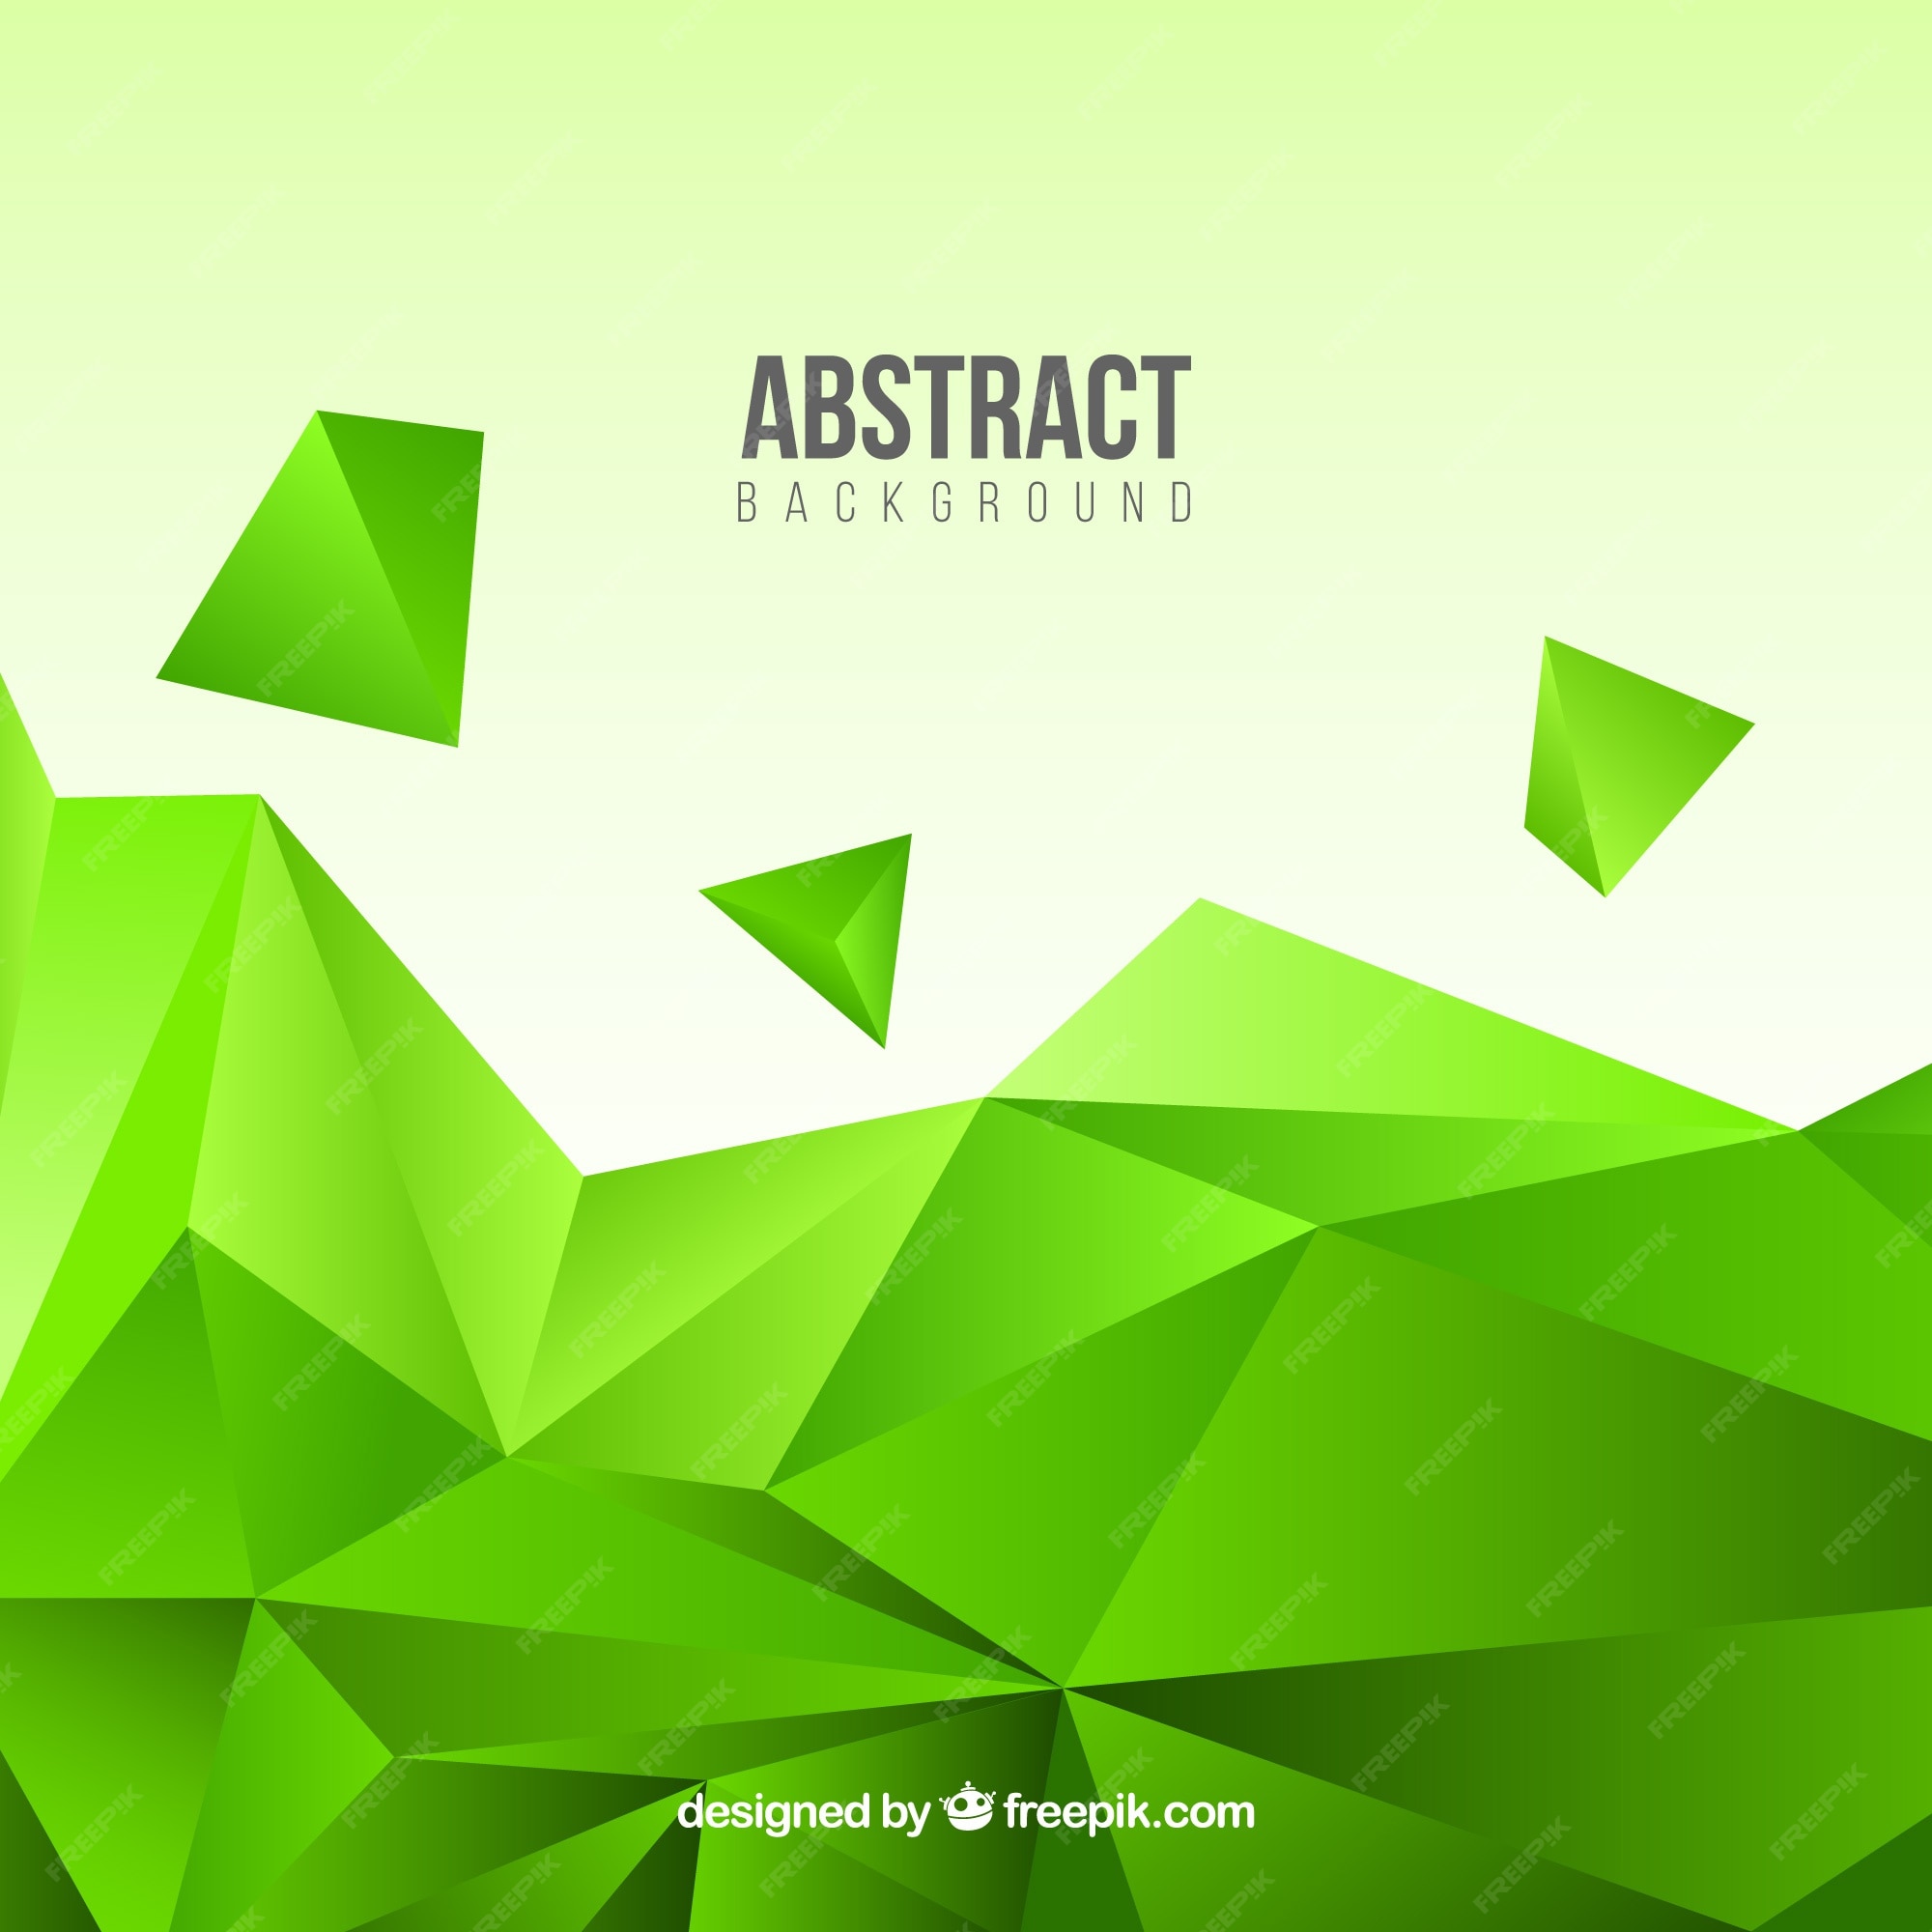 Free Vector | Abstract geometric green background